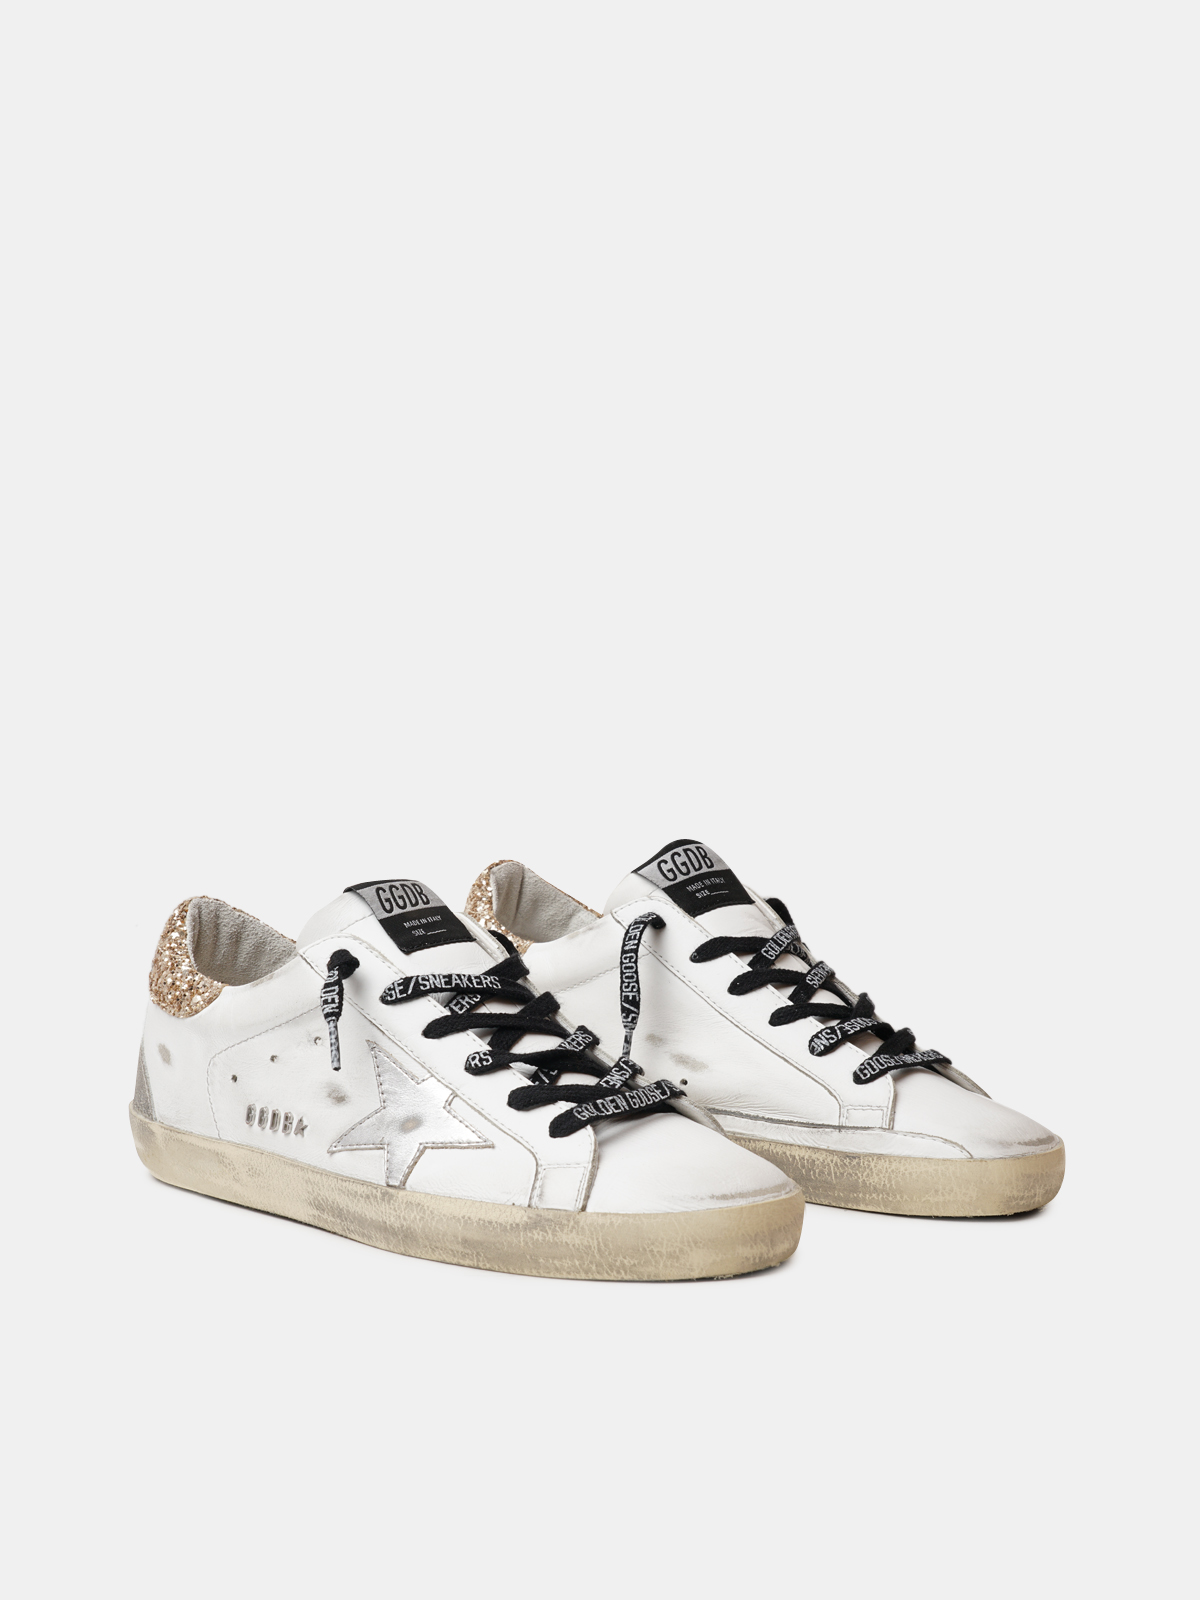 White leather Super-Star sneakers with glittery heel tab | Golden